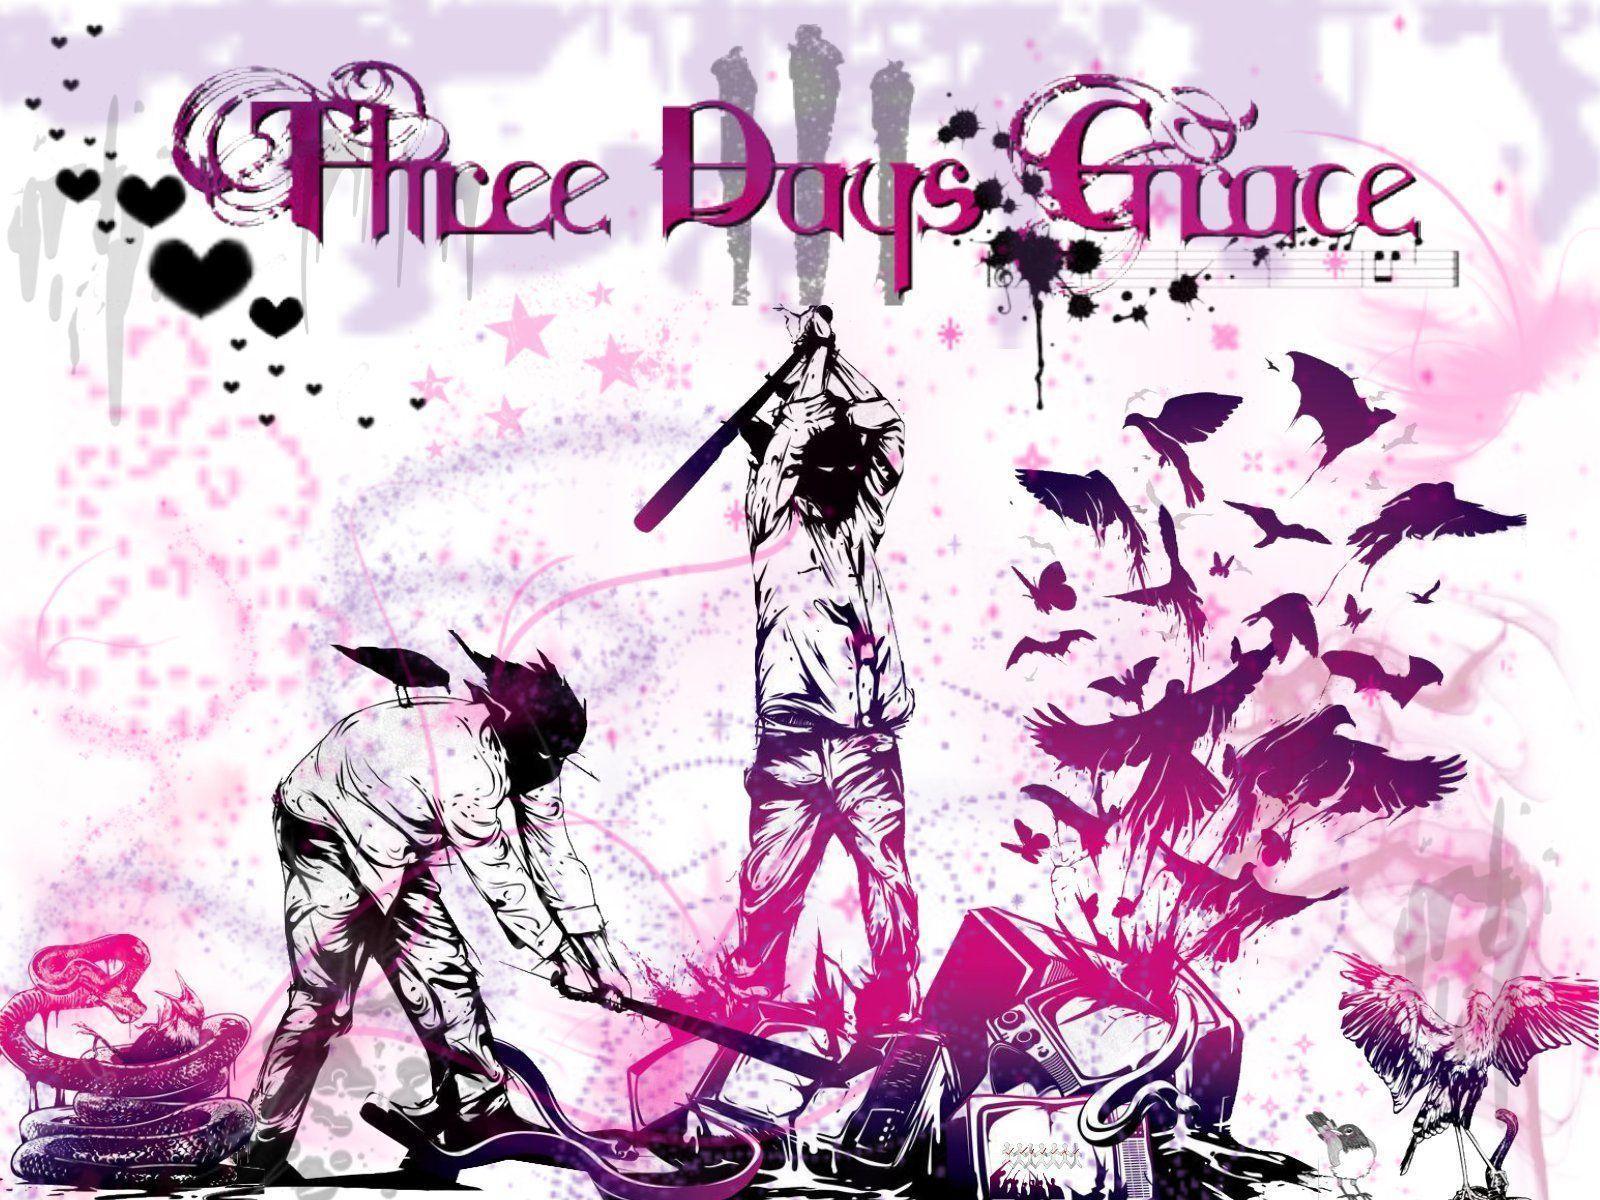 Life Starts Now by Three Days Grace on Amazon Music